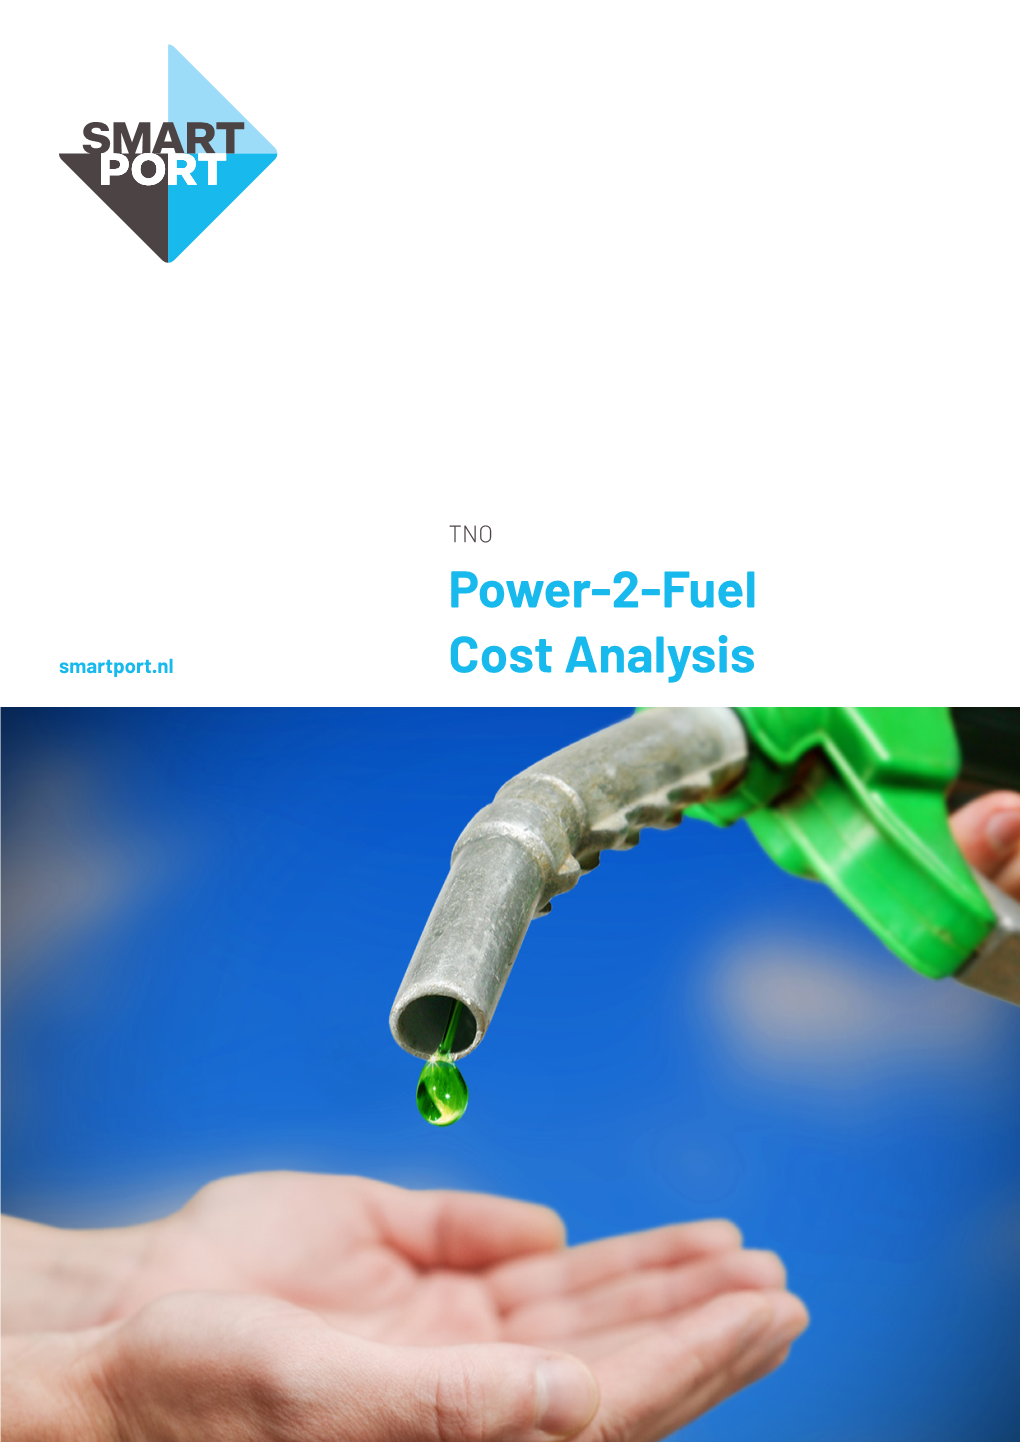 Power-2-Fuel Cost Analysis